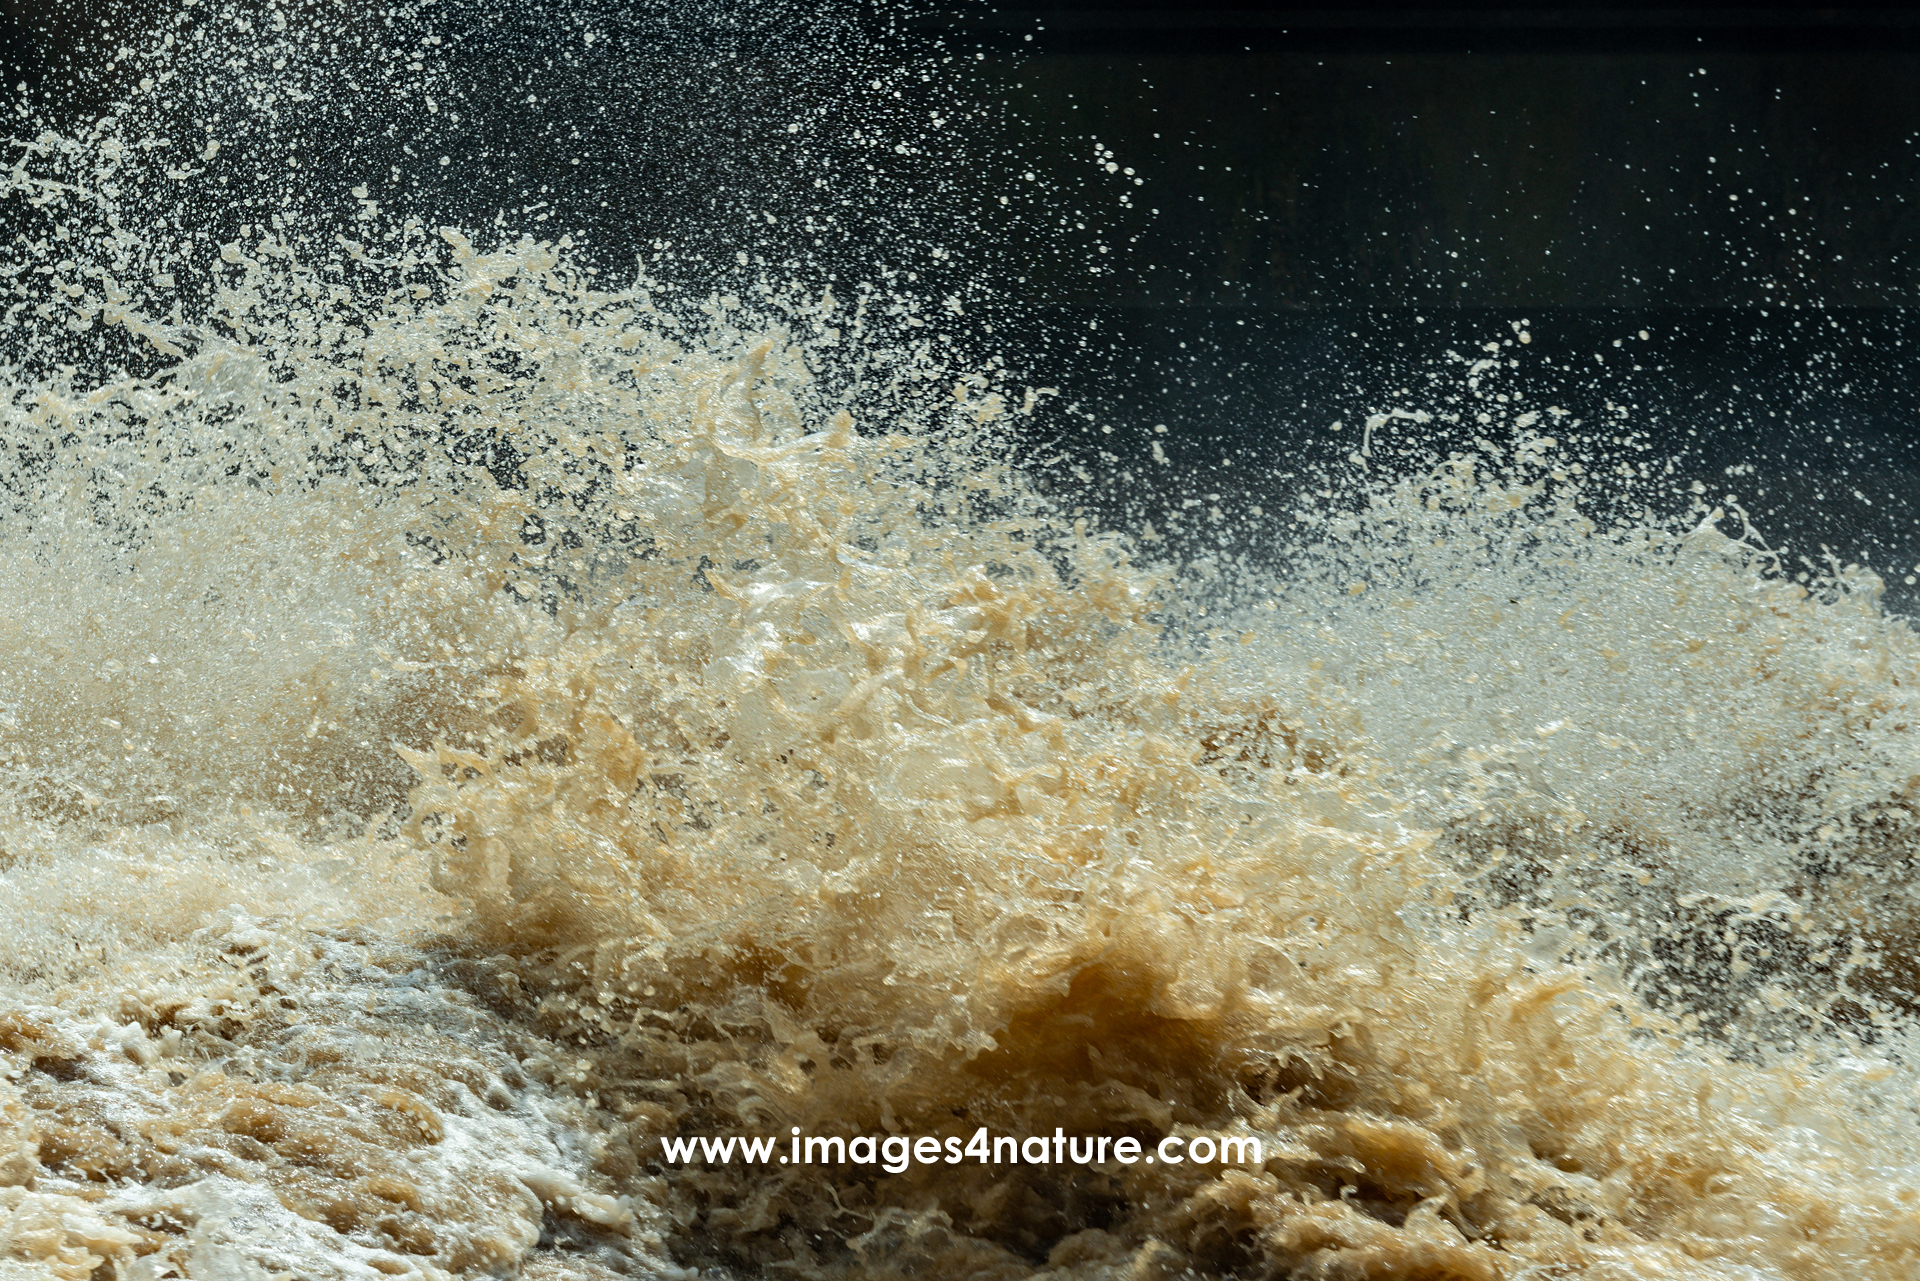 Close-up on the top of a wave of brown water with lots of droplets spraying in the air